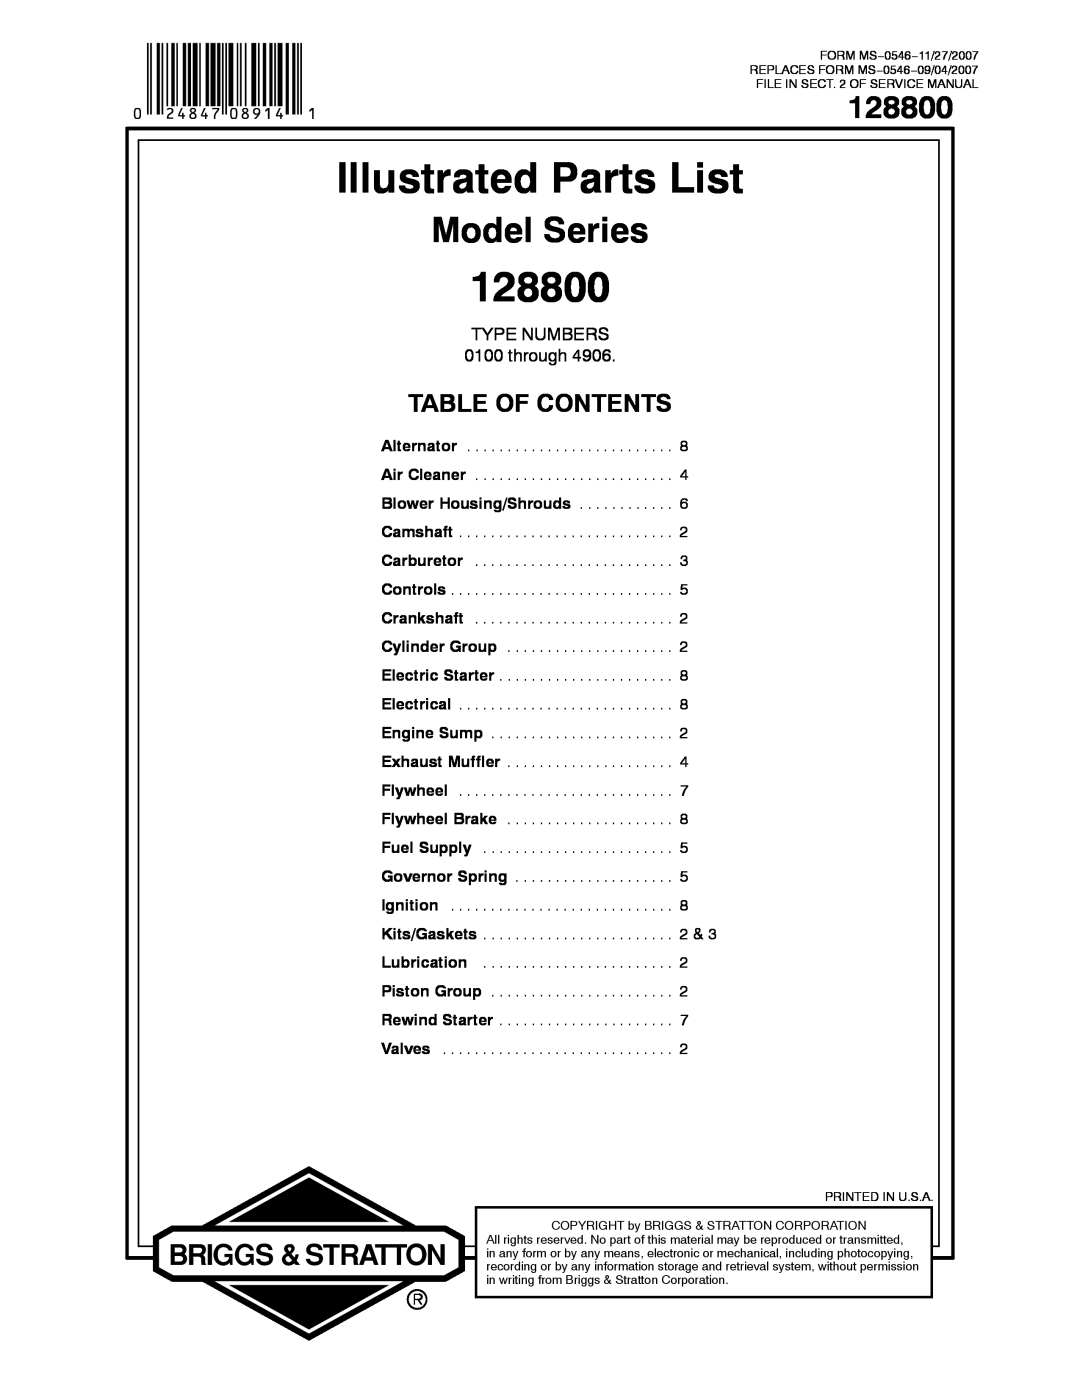 Briggs & Stratton 128800 service manual Illustrated Parts List, Model Series, Table Of Contents, TYPE NUMBERS 0100 through 